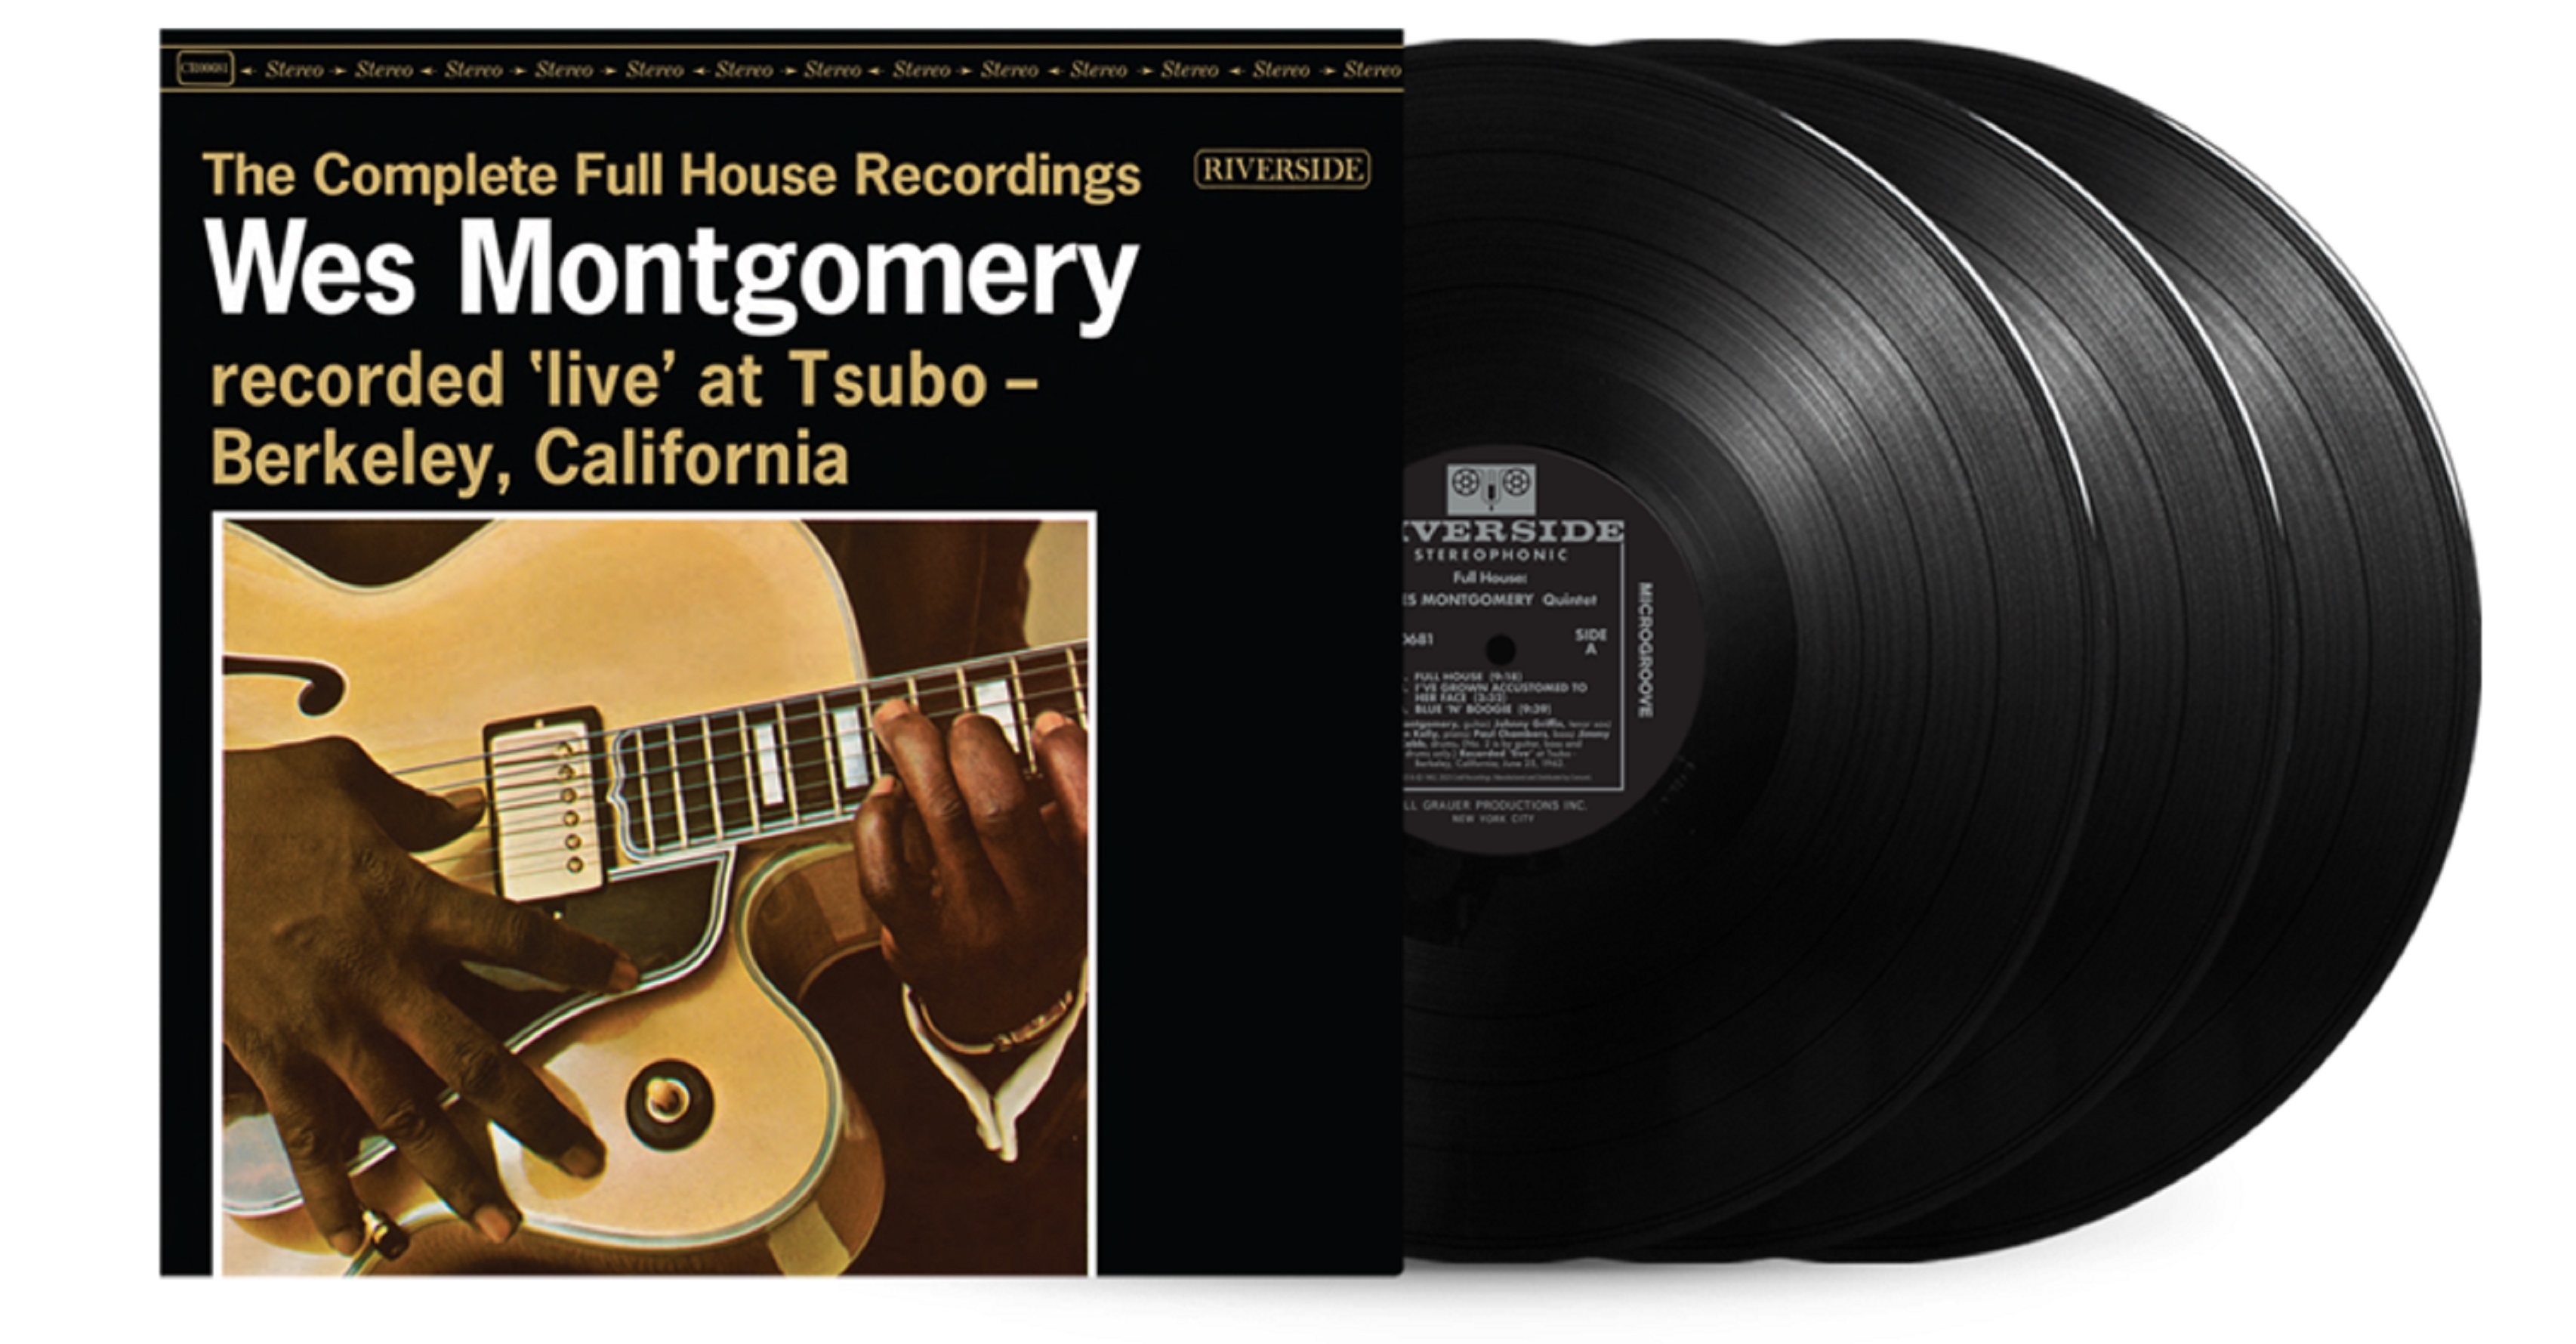 Craft Recordings celebrates centennial of Wes Montgomery and Riverside Records’ 70th anniv. with 'The Complete Full House Recordings'